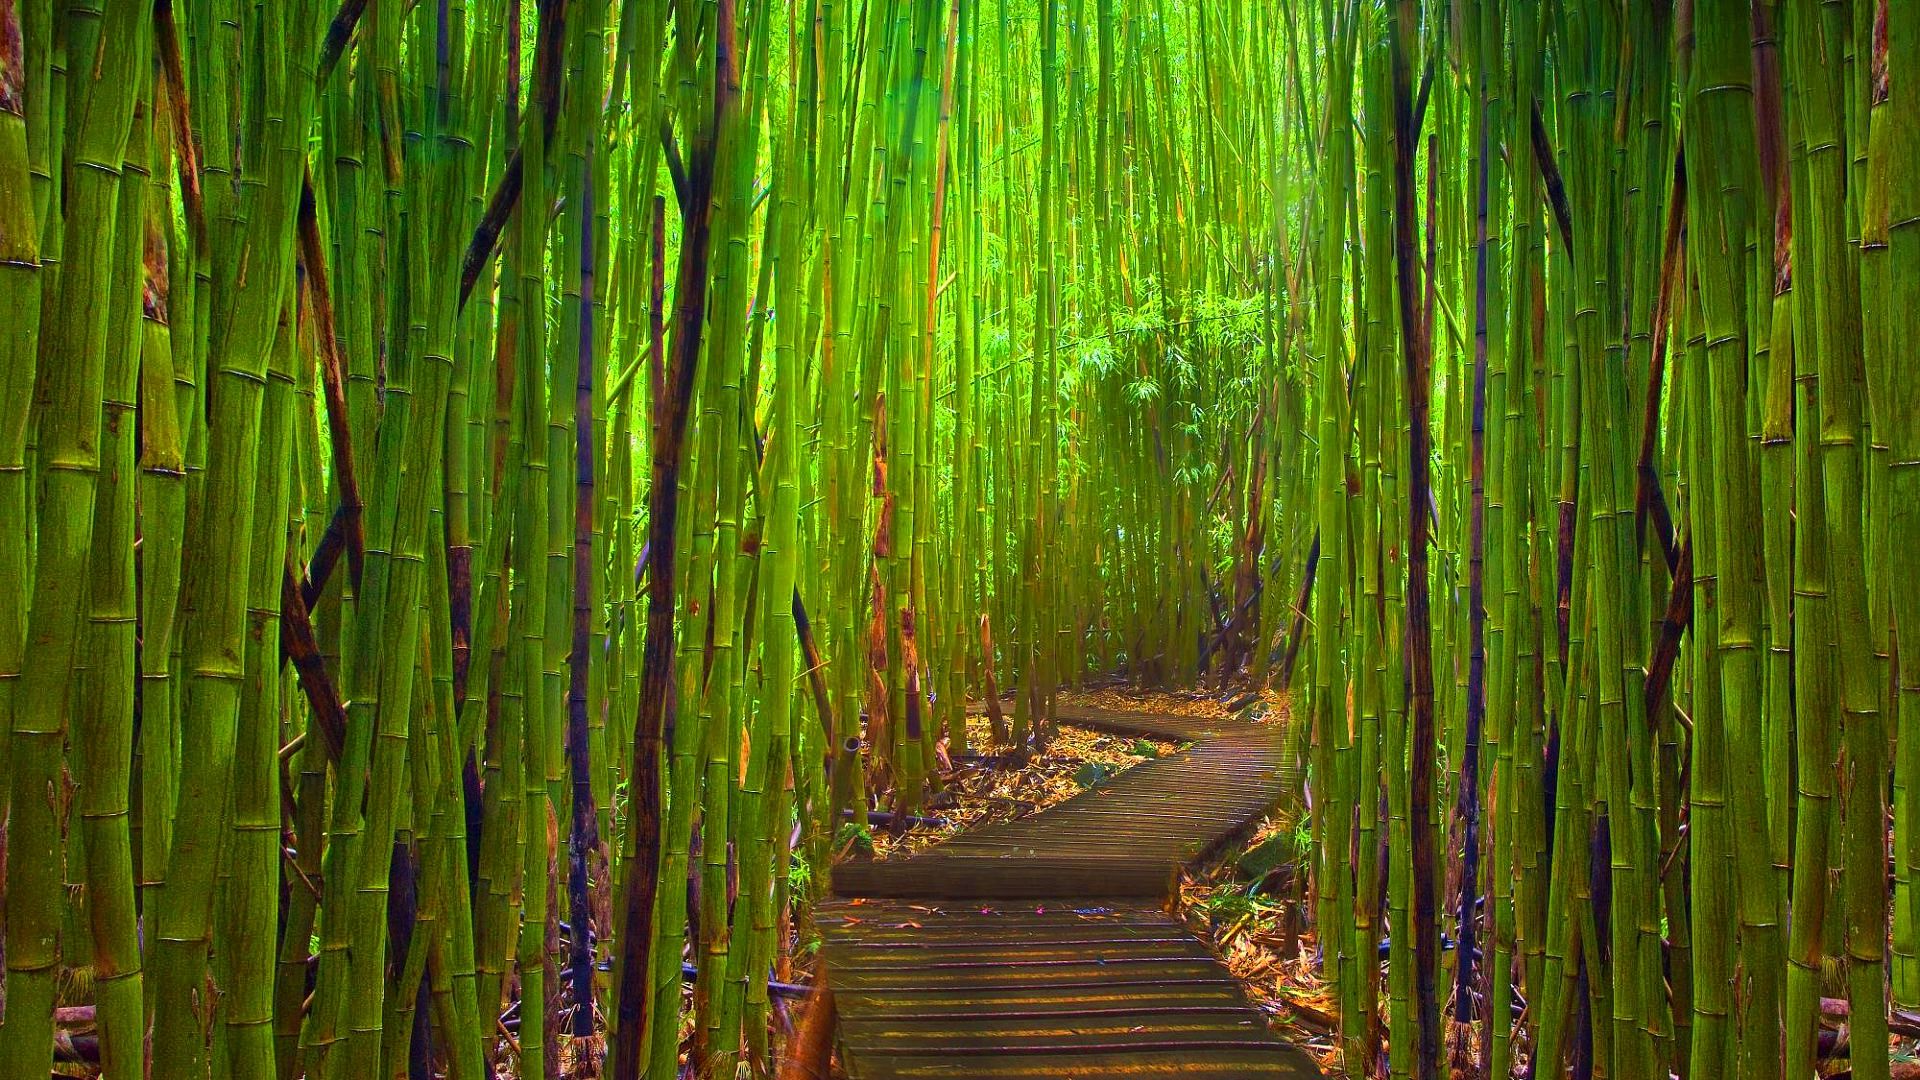 Bamboo HD Wallpaper Picture Image